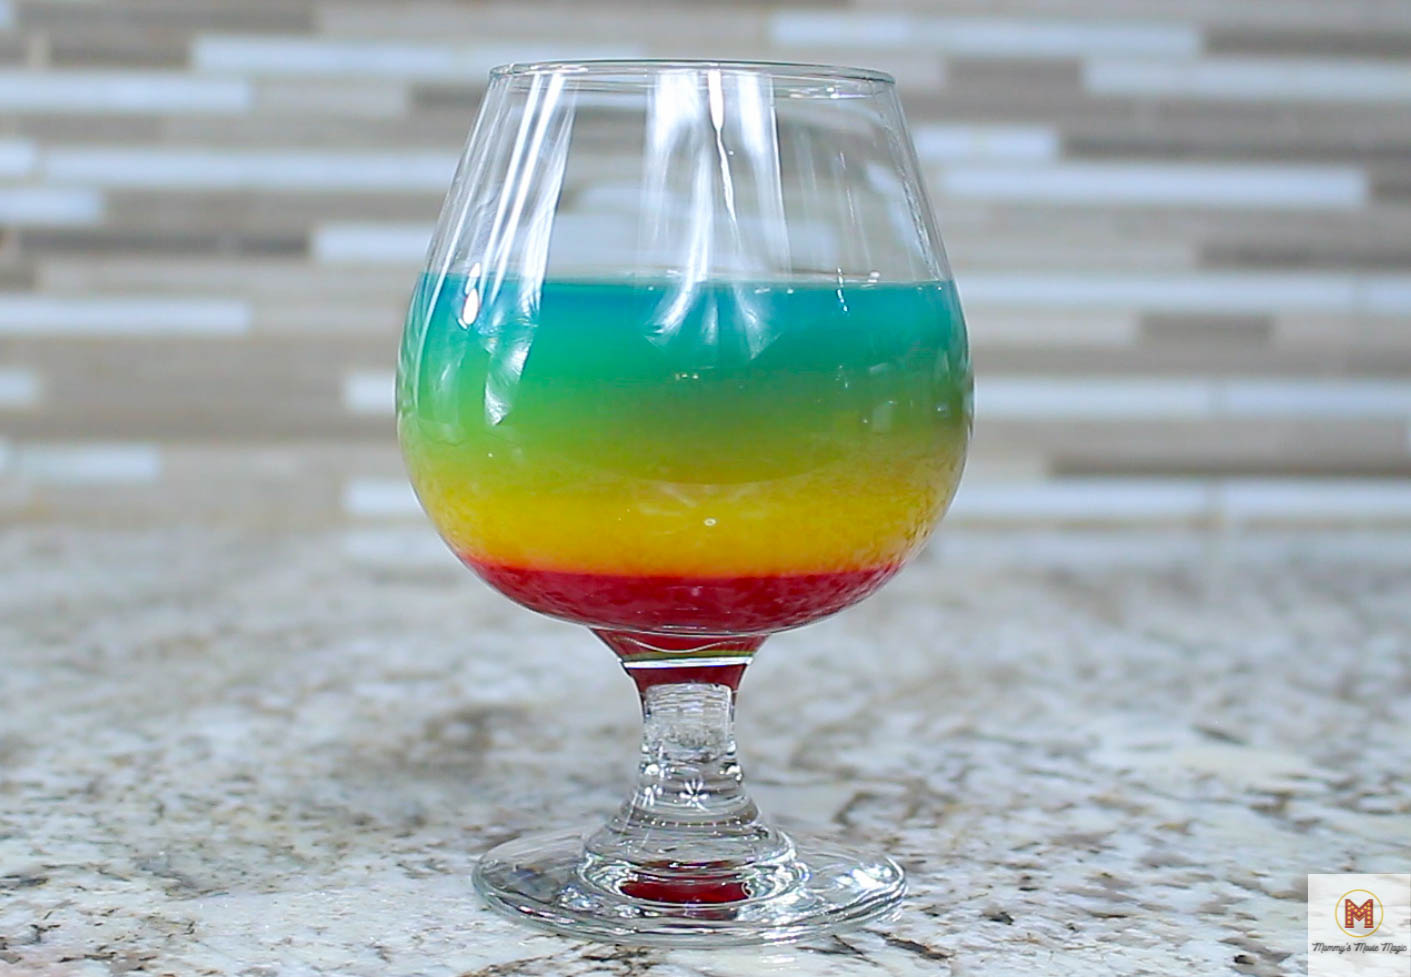 Trolls World Tour Movie Night for Family Movie night idea with Trolls World Tour Party food - Rainbow drink for a rainbow party